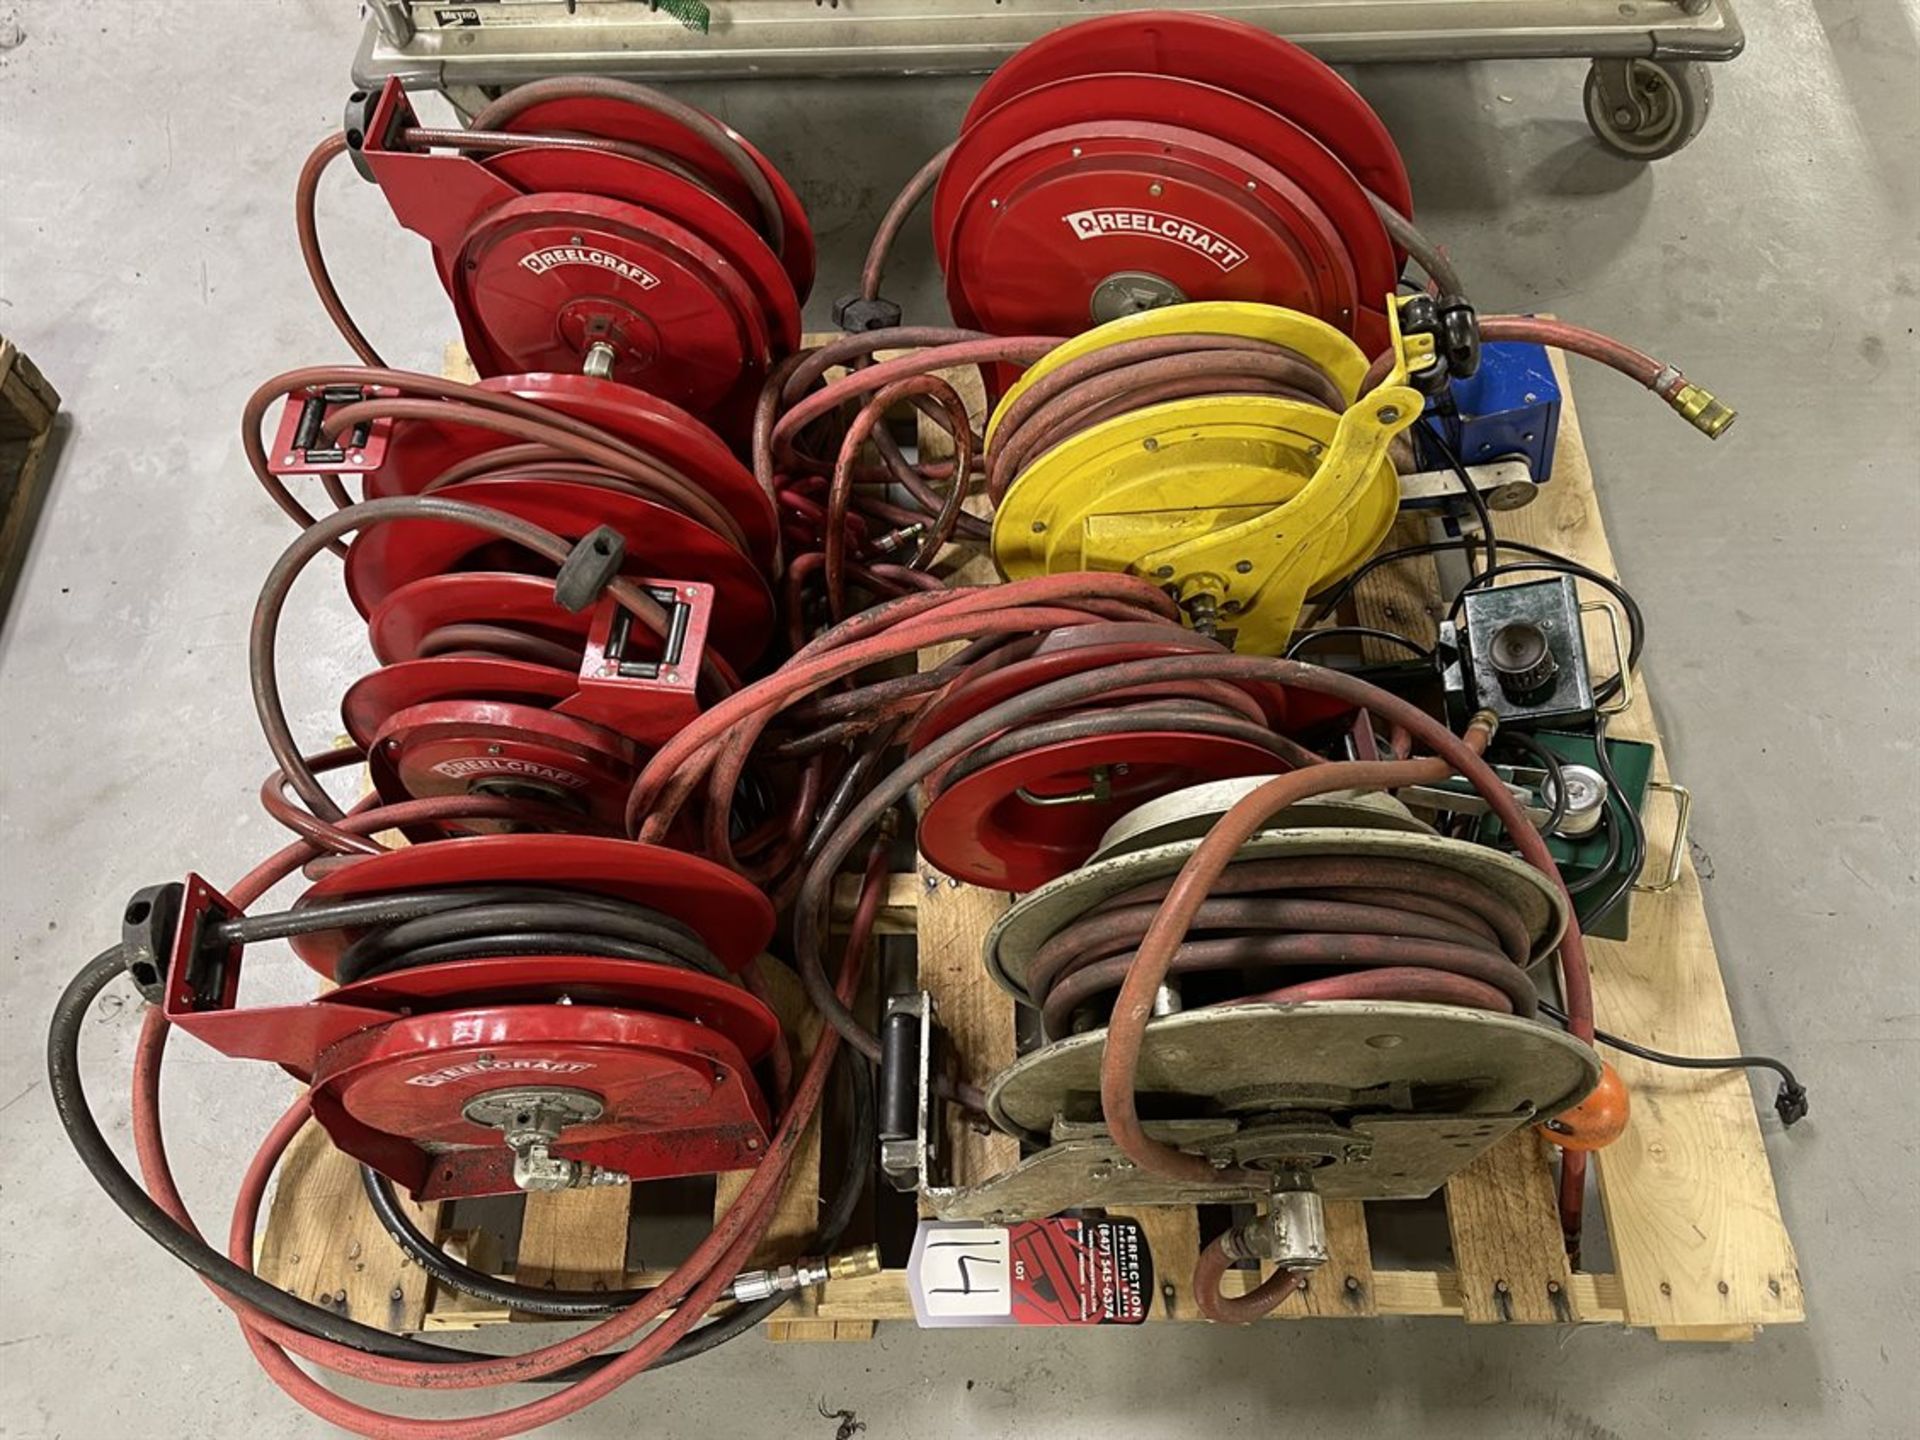 Lot of Assorted Hose Reels and Coolant Skimmers - Image 2 of 3